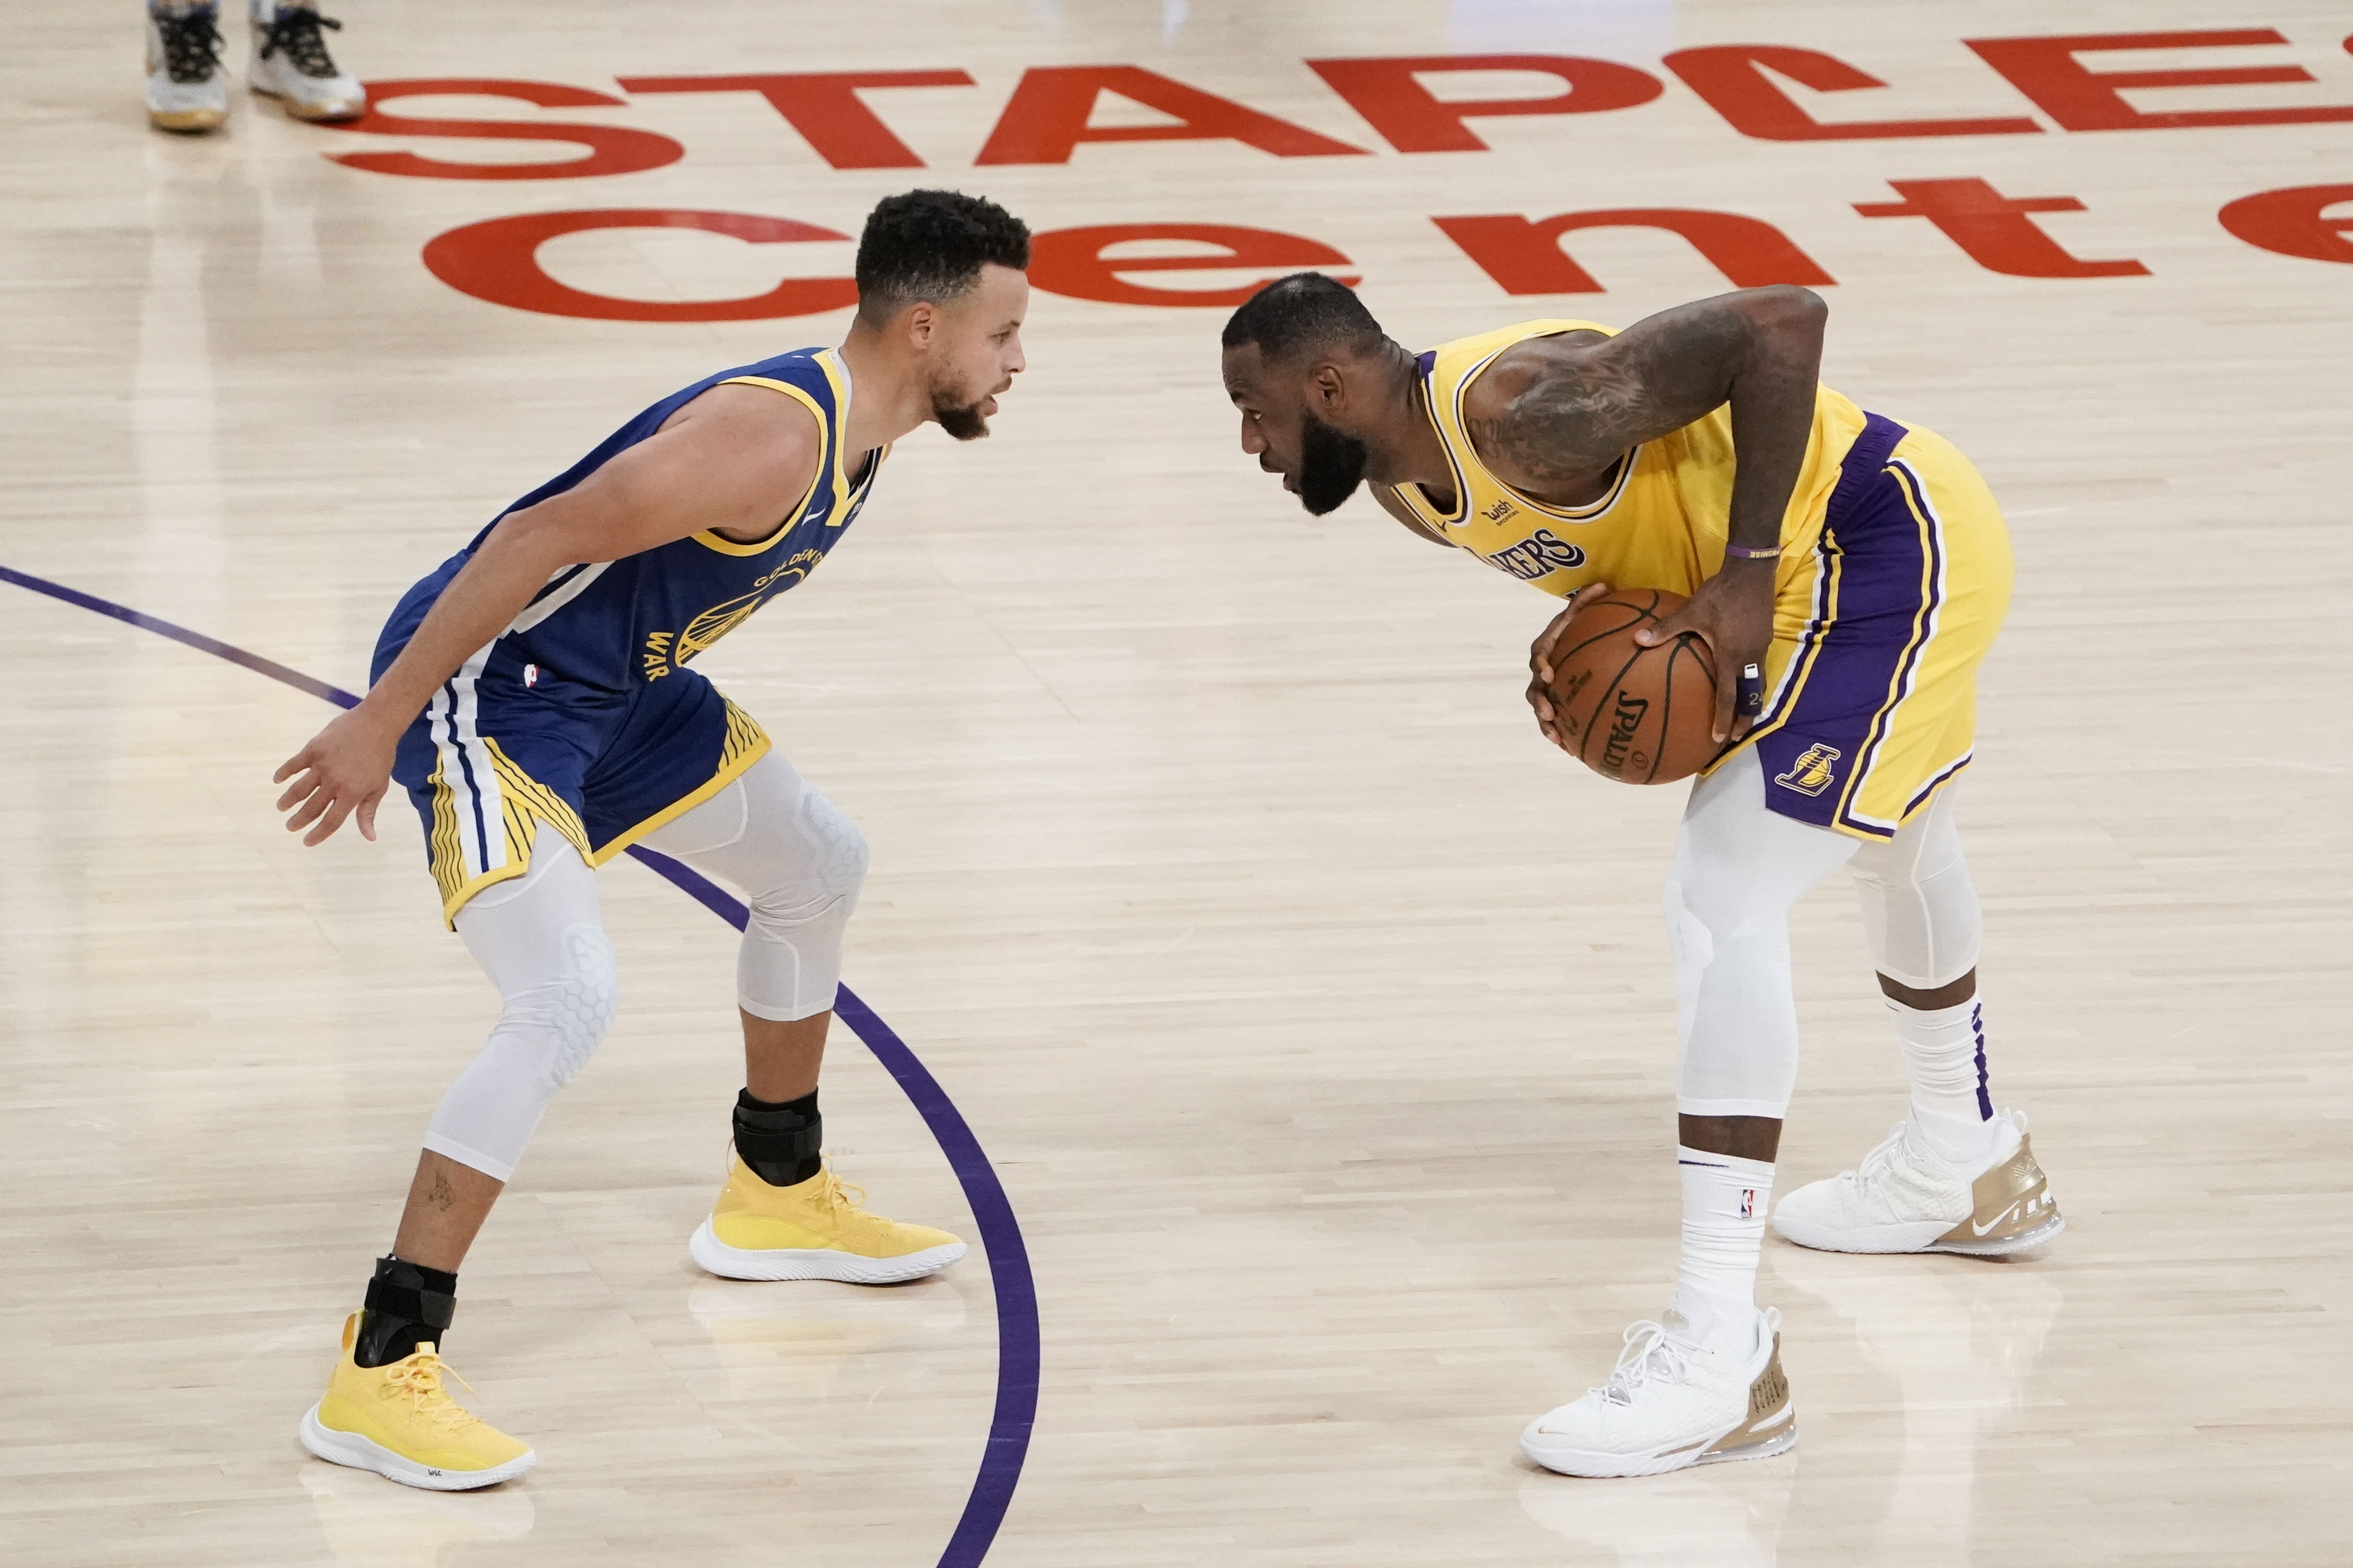 The NBA All-Star Game 2018 Live Stream: How To Watch Team LeBron James Vs.  Team Steph Curry